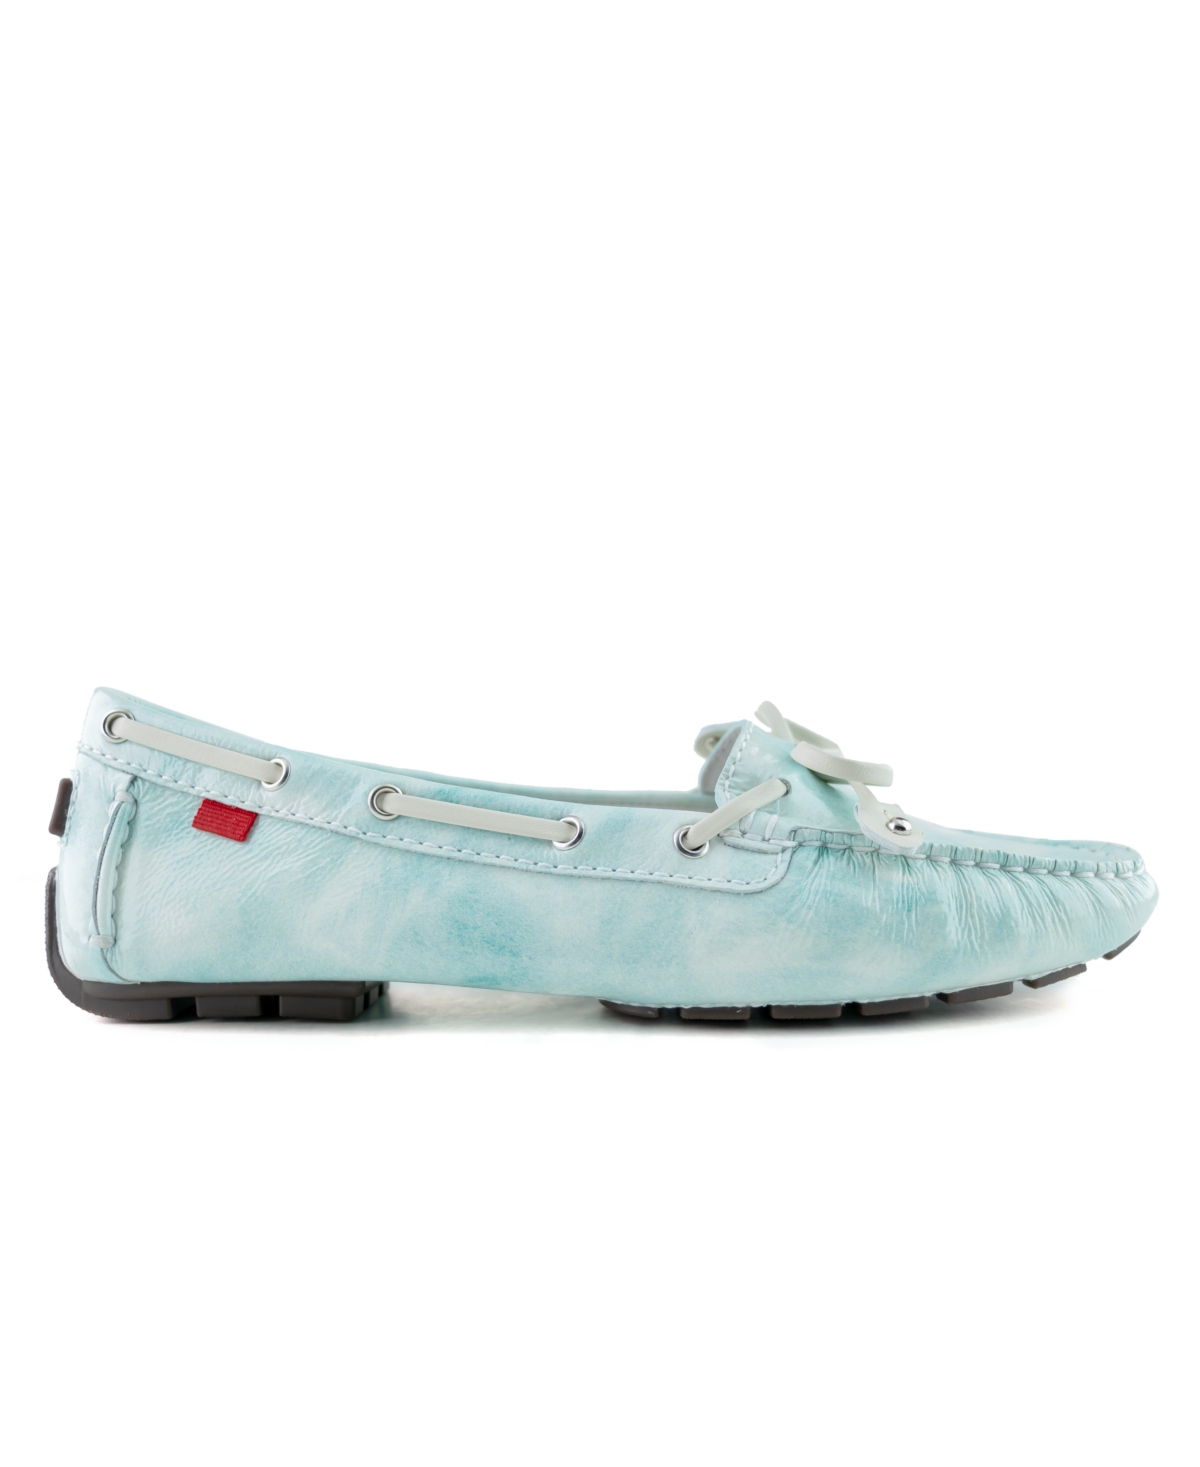 Cypress Hill Leather Flats - Mint Stained Patent